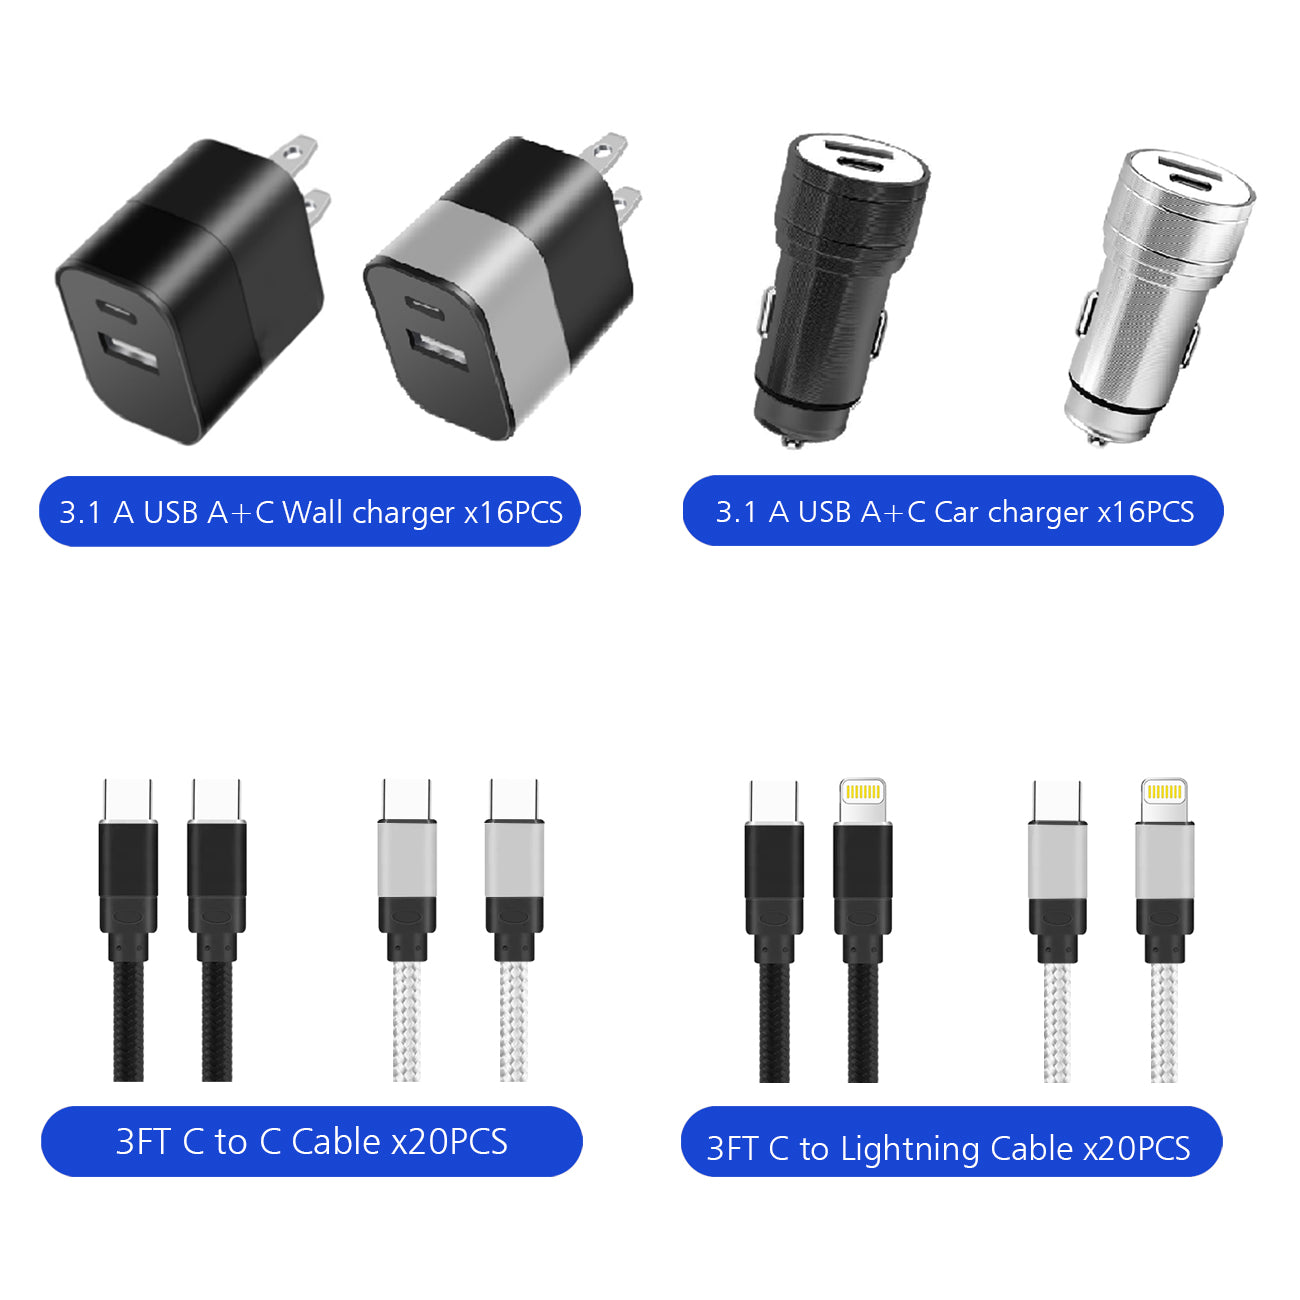 2.4A USB A + C WALL /charger 3.1 A usb a+ c car charger /3 ft c to c cable /3ft c to lightning cable in counter display total 72pcs